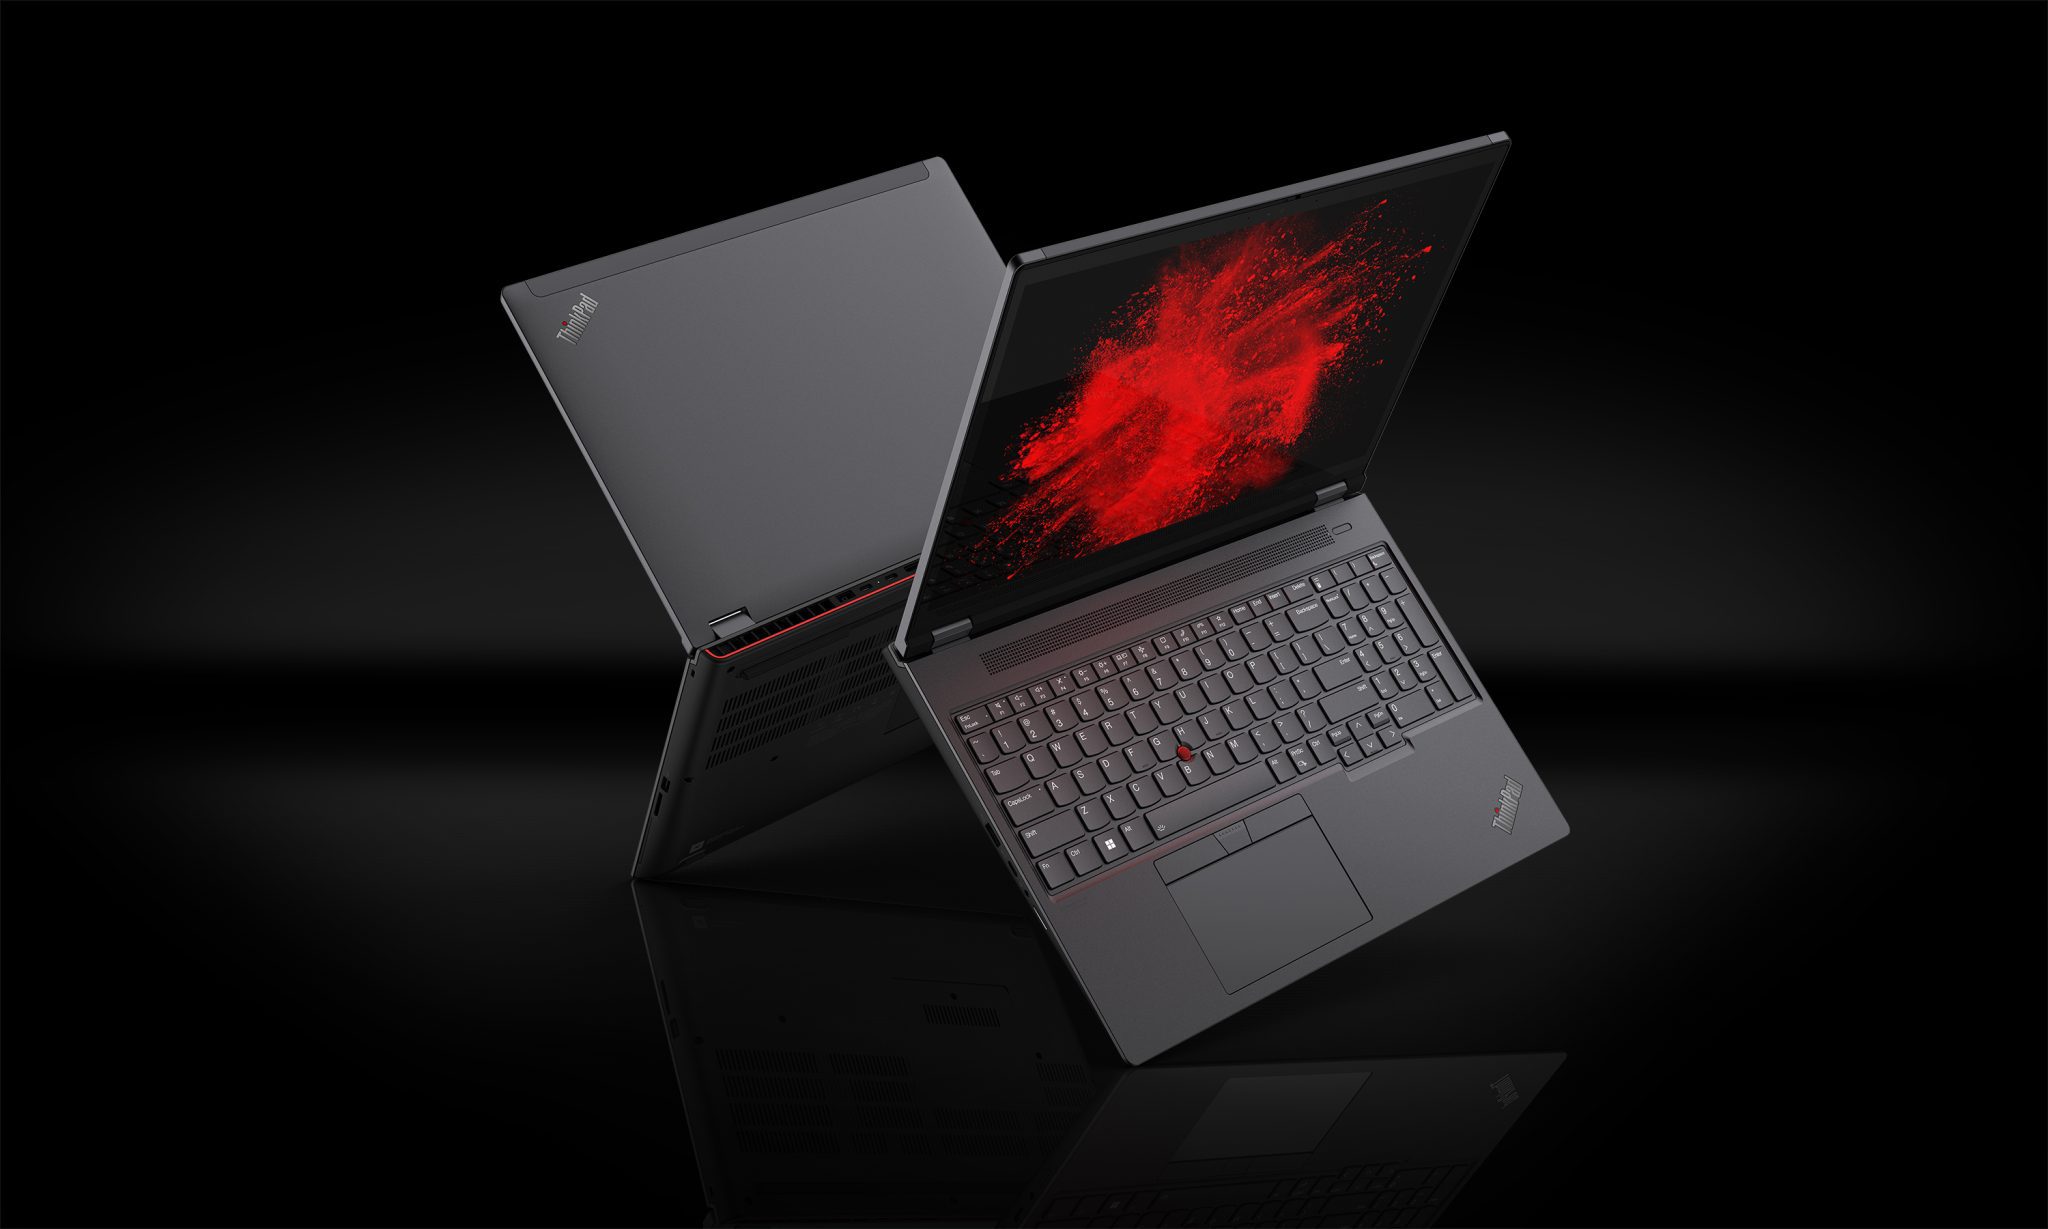 Introducing the Lenovo ThinkPad P16: A New Power-Packed Mobile Workstation Tackling the Most Demanding Workflows On the Go